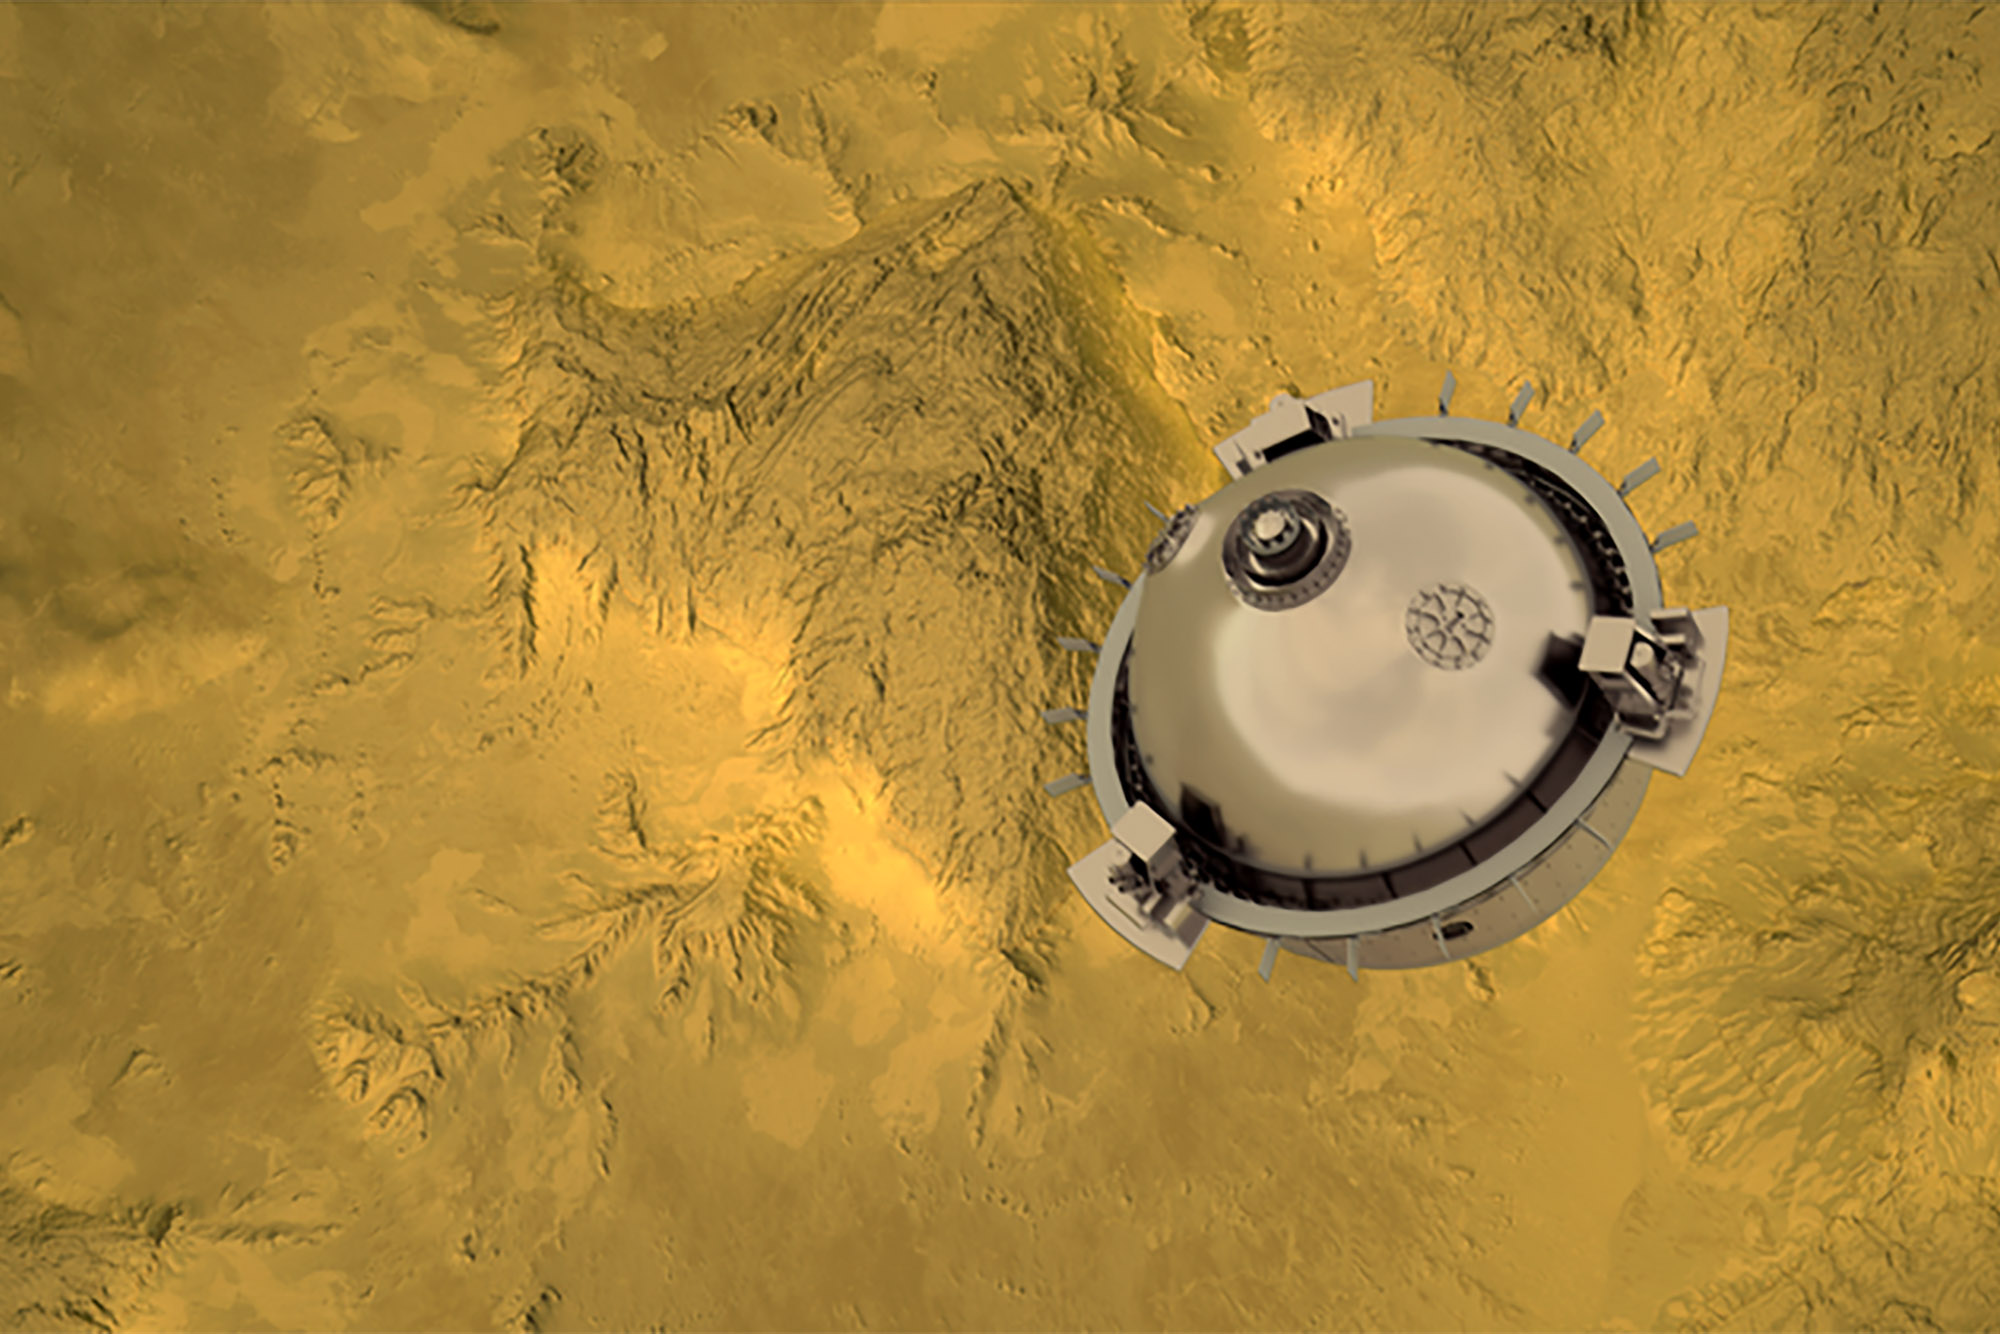 NASA plan for an instrument to withstand conditions of Venus